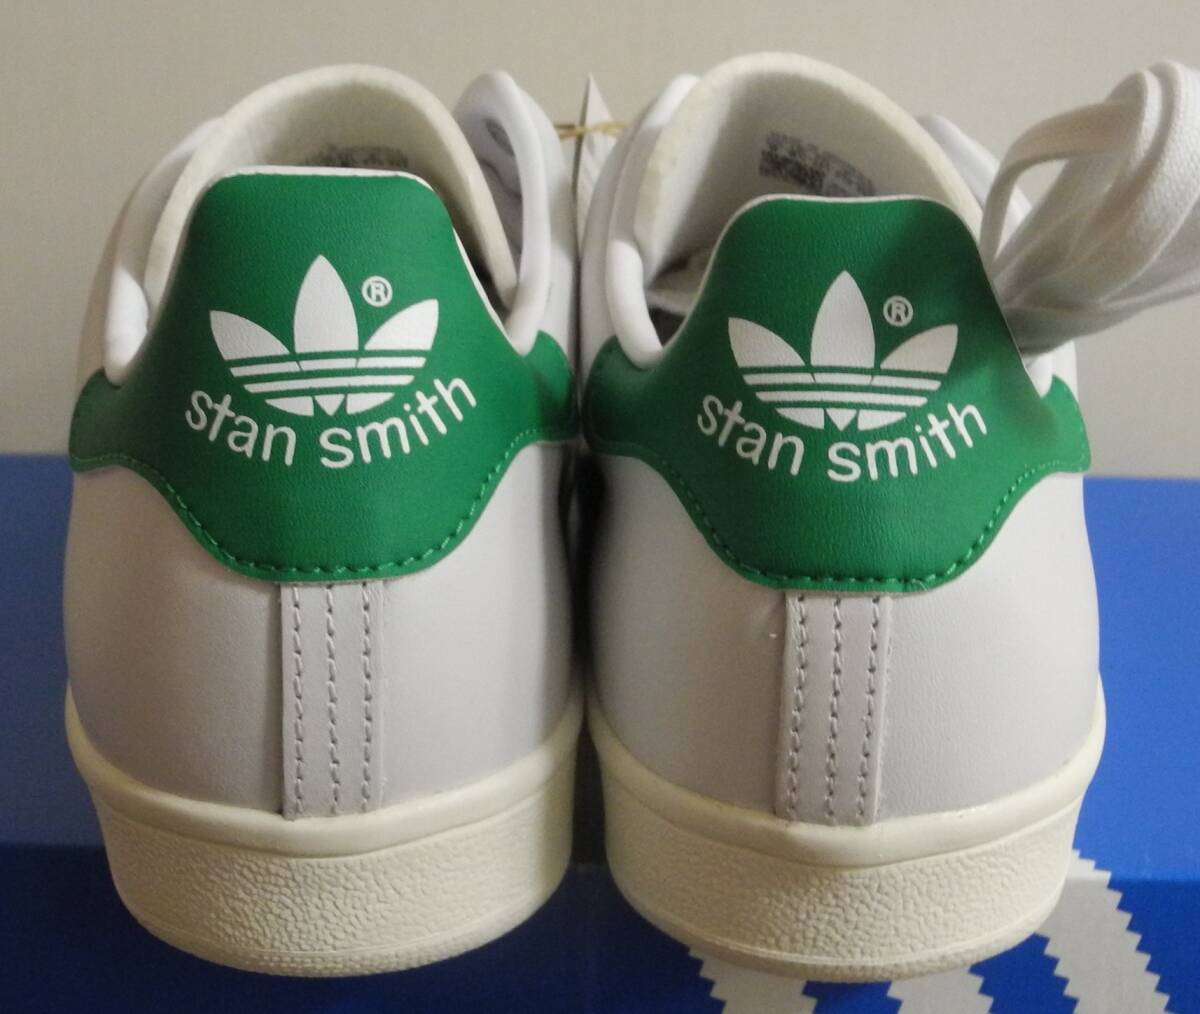  new goods Stansmith 80s 2023 year made JP27.0cm regular price 19,800 jpy IF0202 white × green natural leather adidas stansmith original leather white × green 